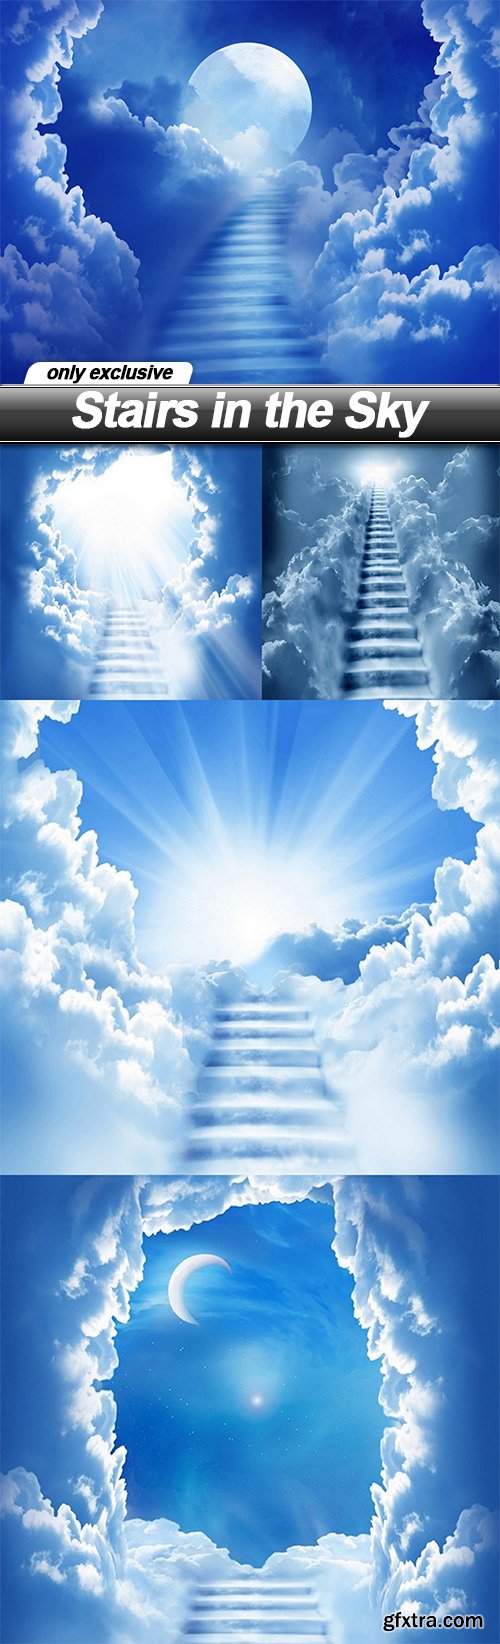 Stairs in the Sky - 5 UHQ JPEG